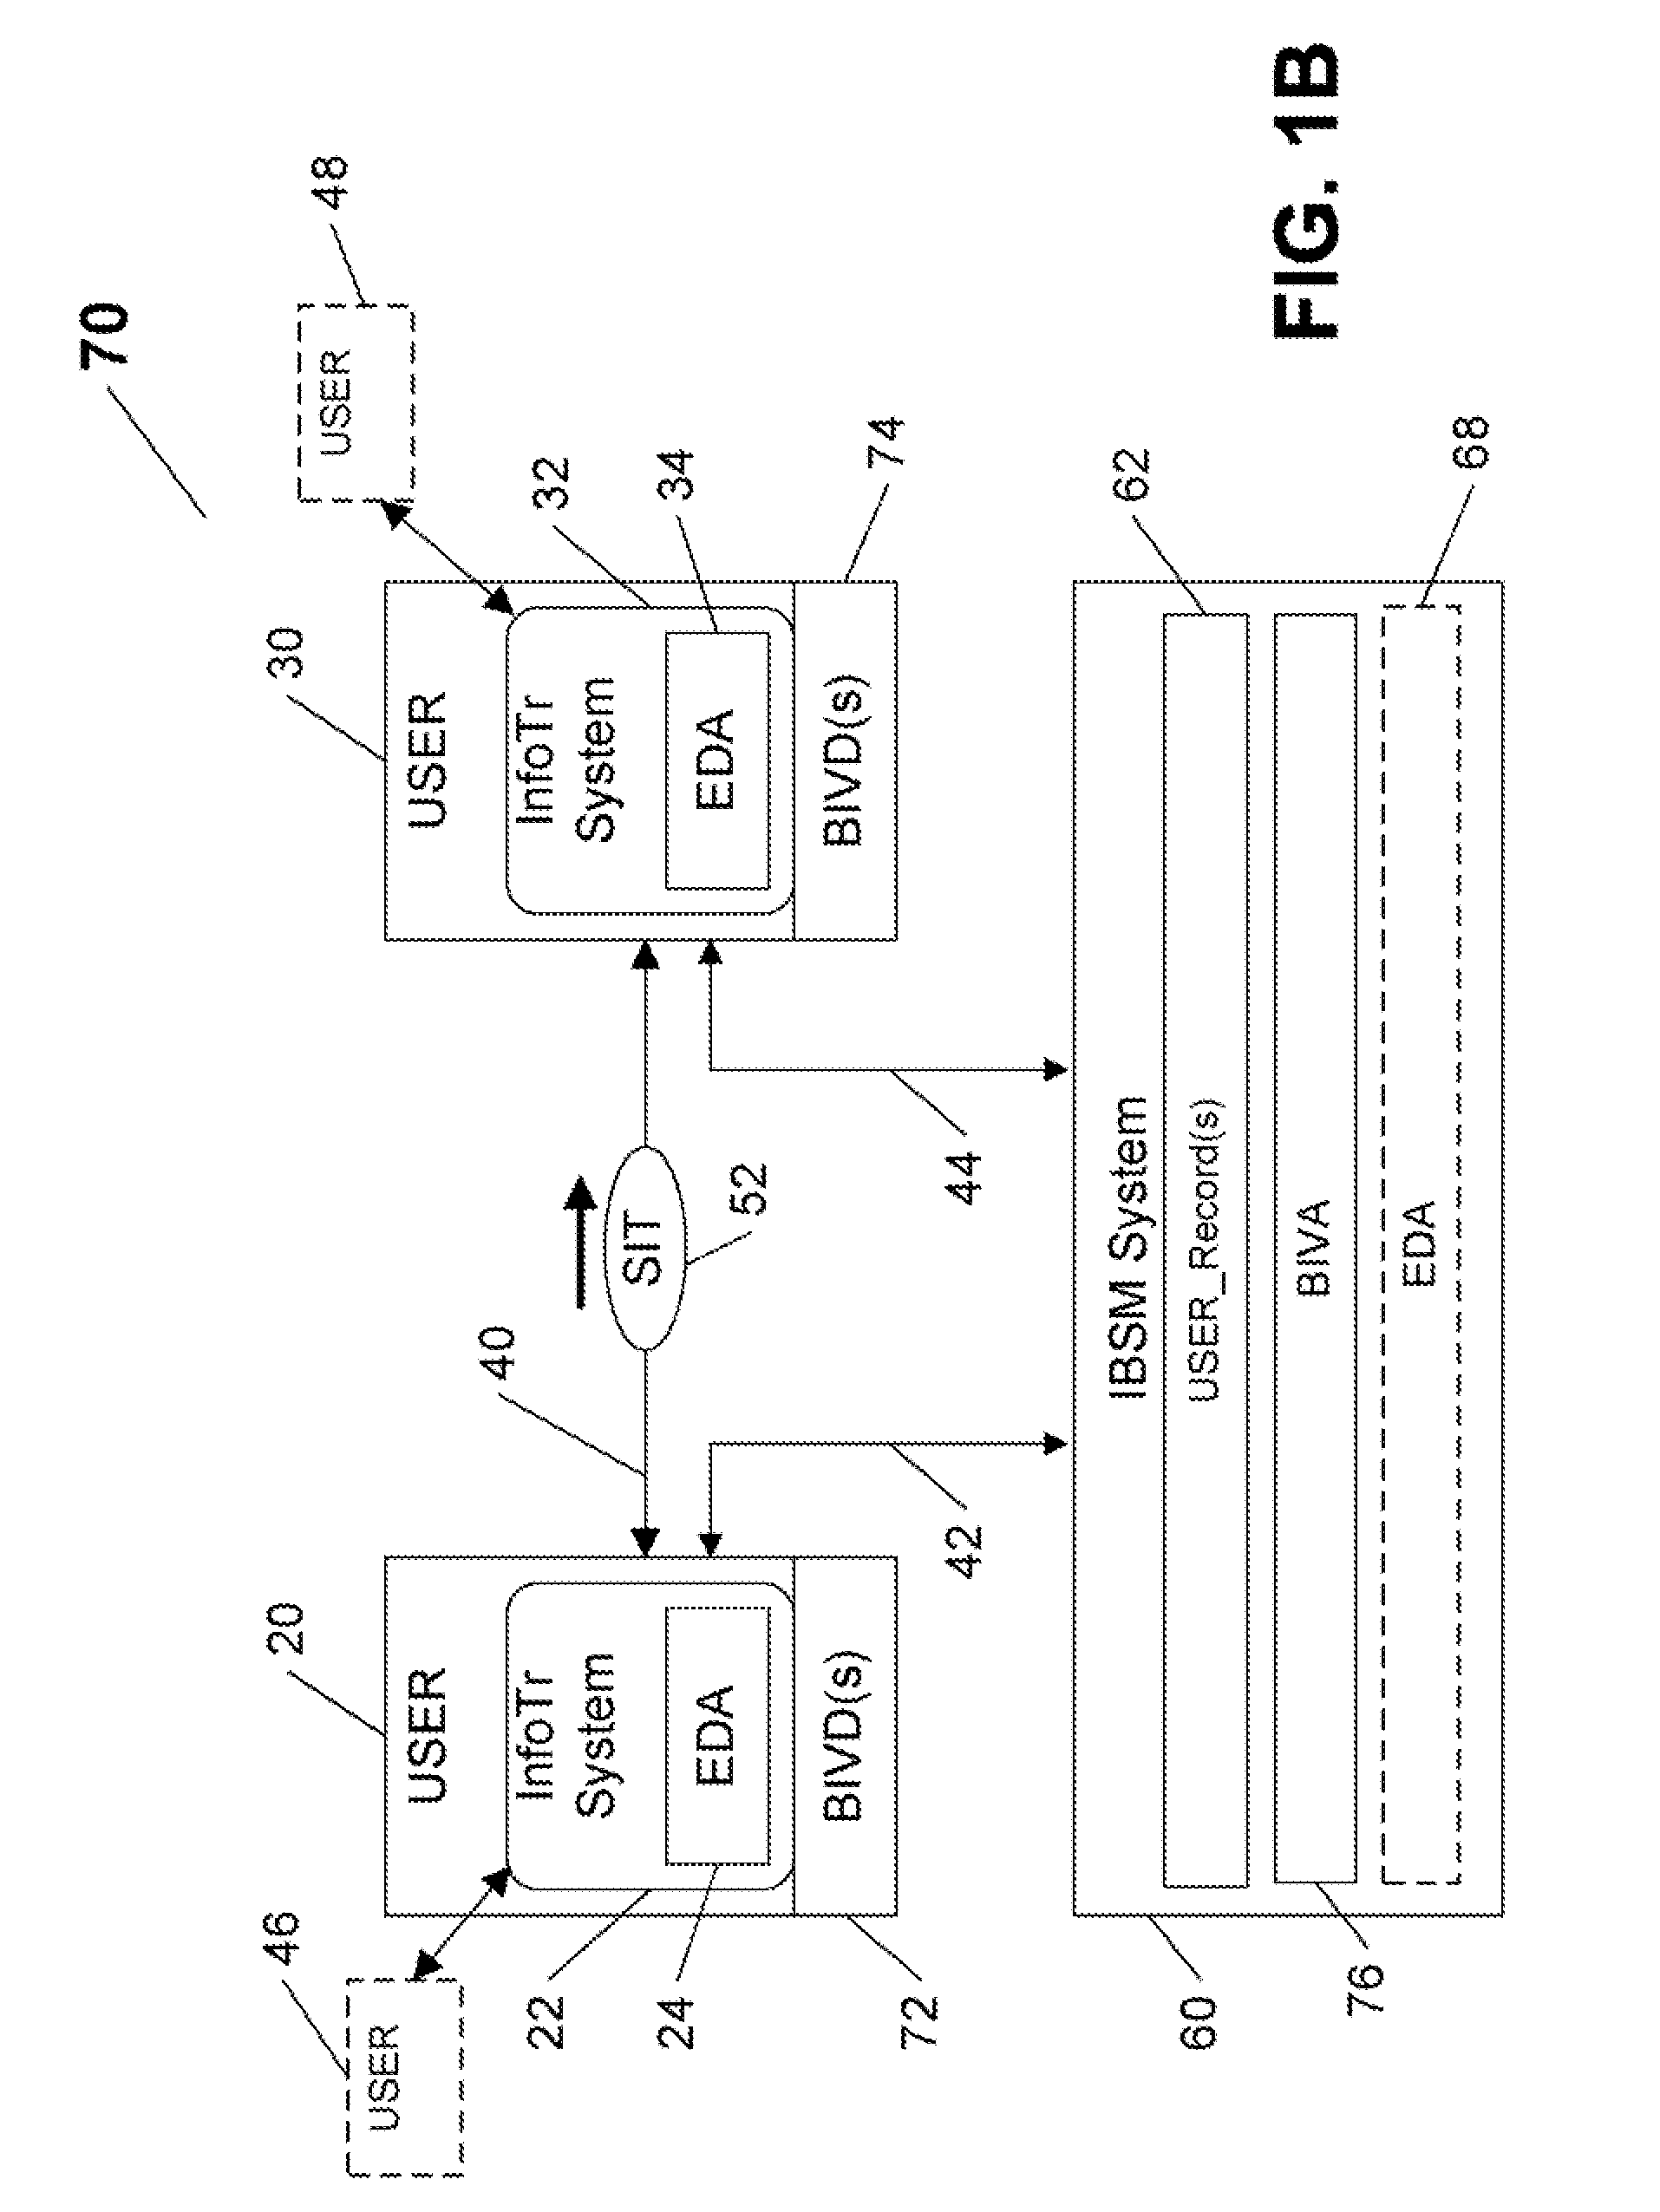 System and Method for Platform-Independent Biometrically Secure Information Transfer and Access Control